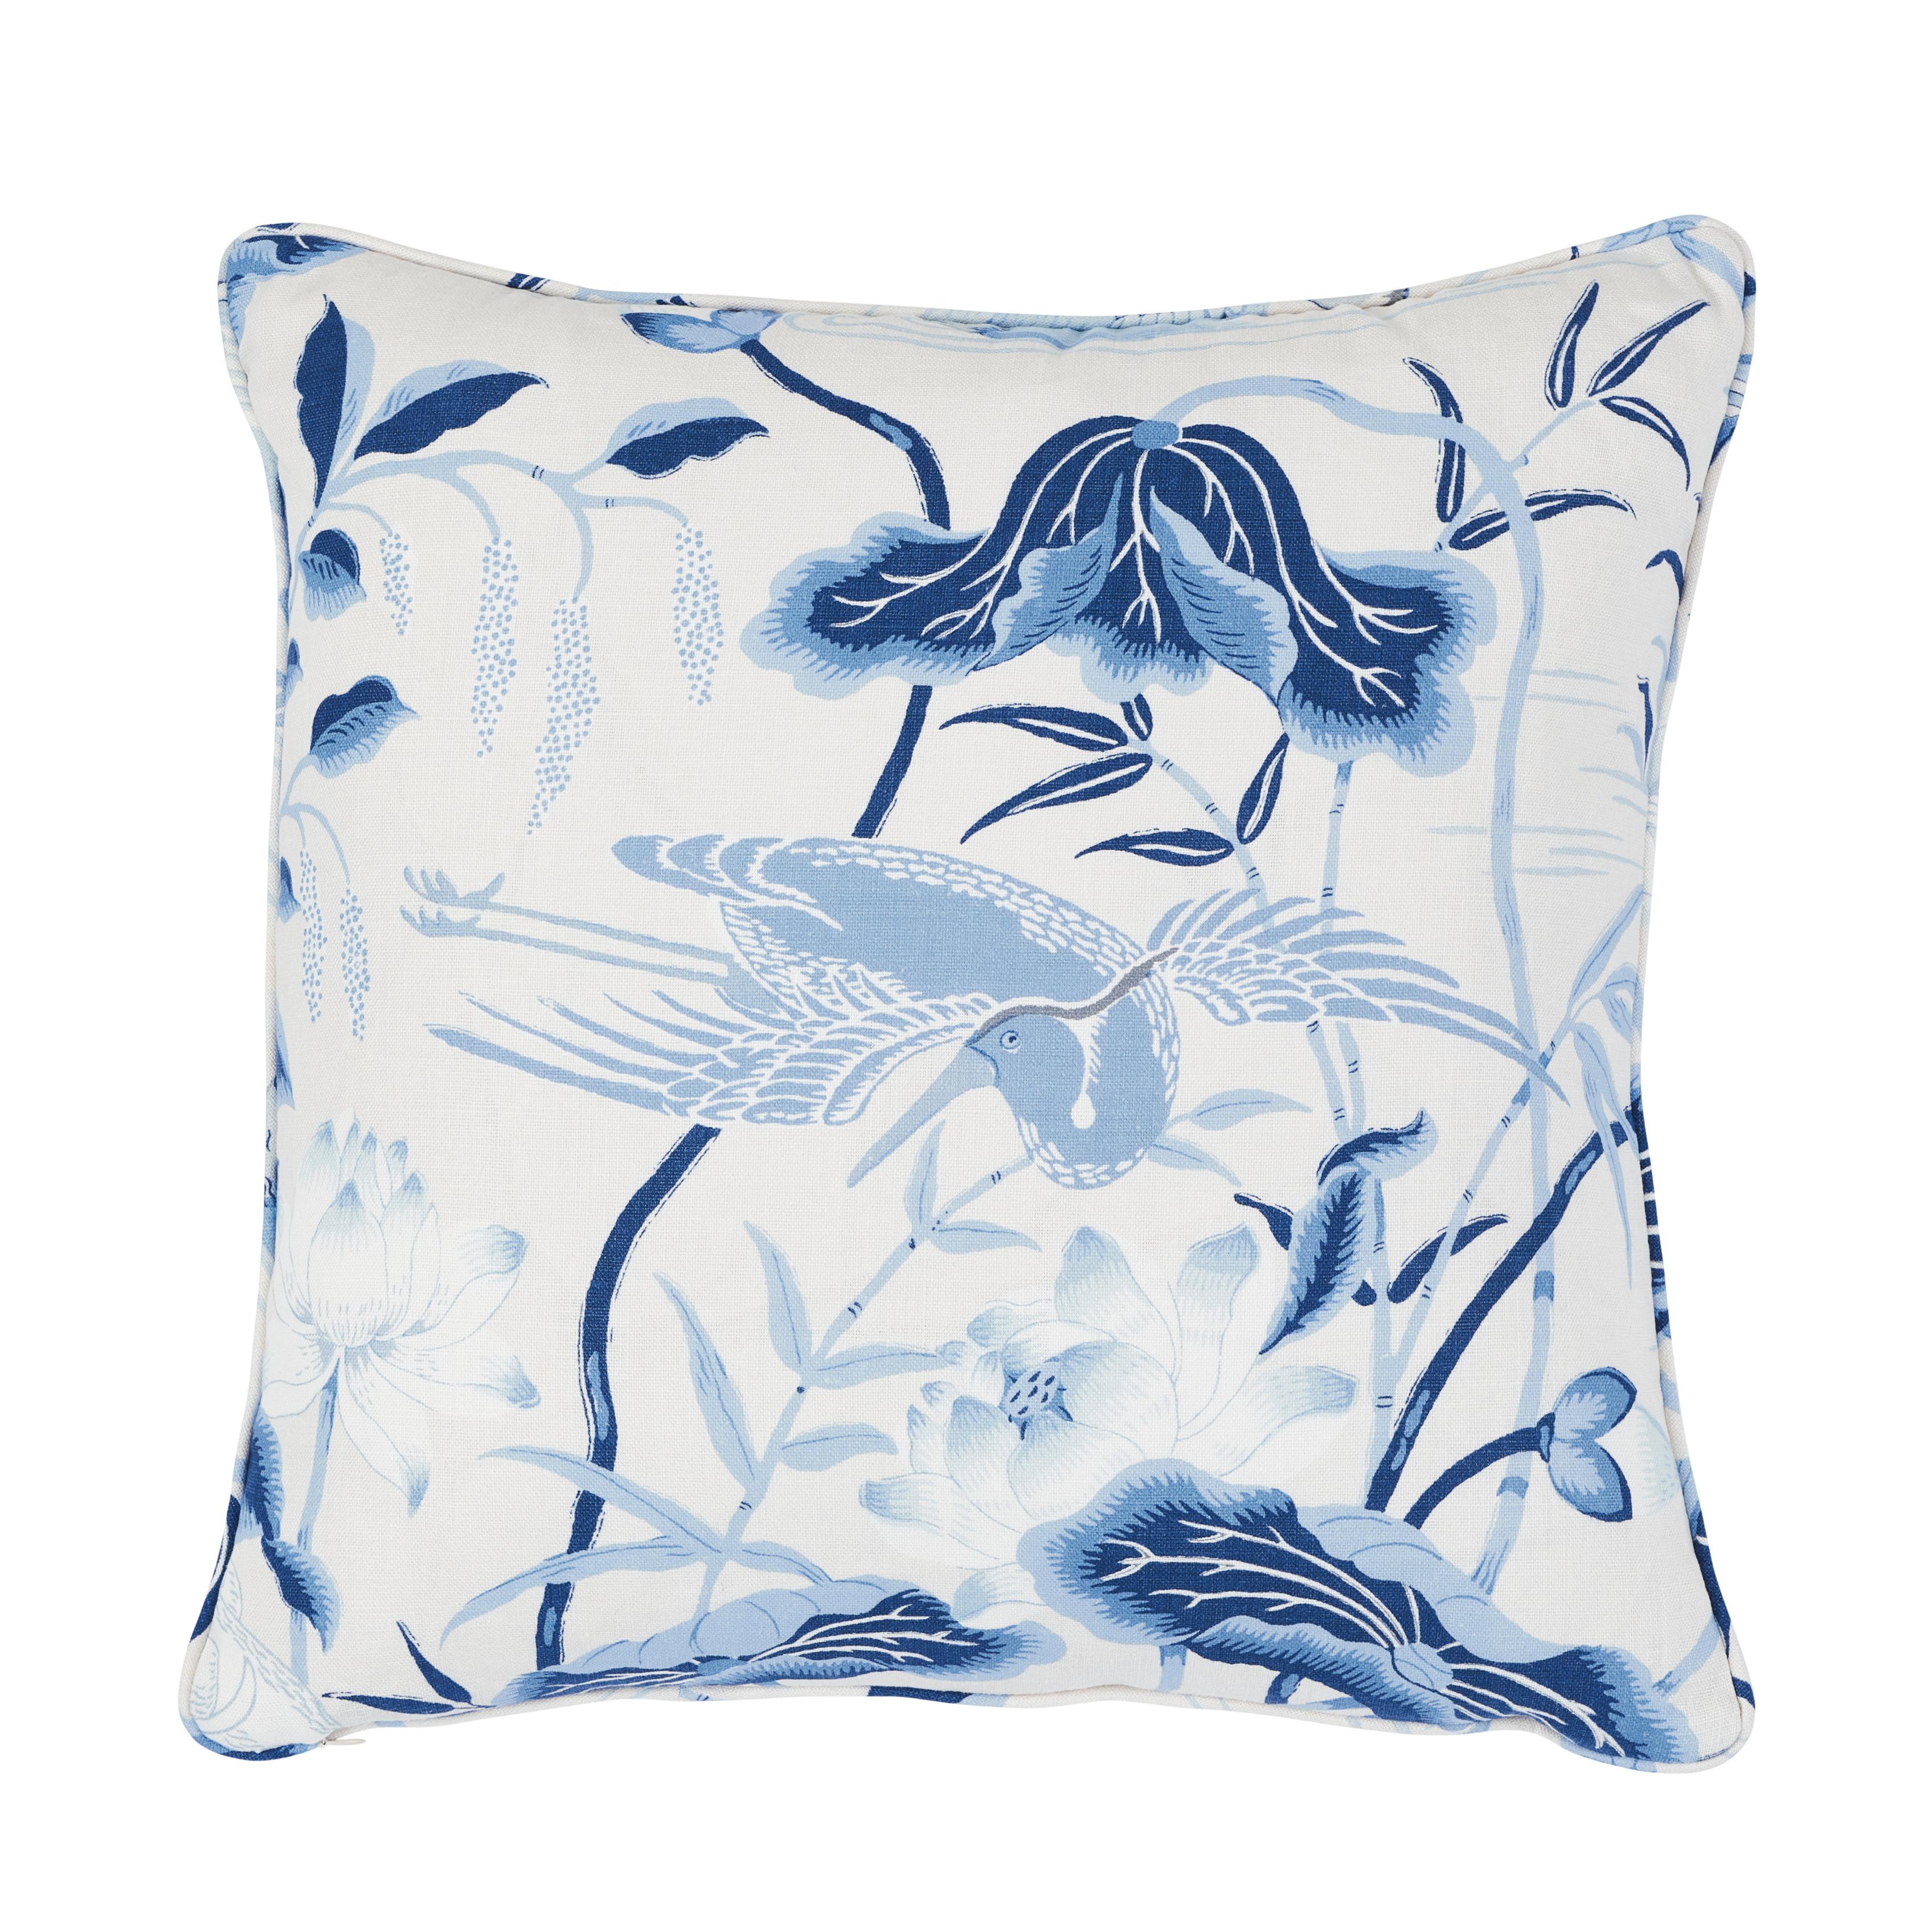 This pillow features Lotus Garden with a self welt finish. An enchanting pattern recreated from a 1920s document in our archives. The masterful design is an ode to Japanese natural motifs. Pillow includes a feather/down fill insert and hidden zipper